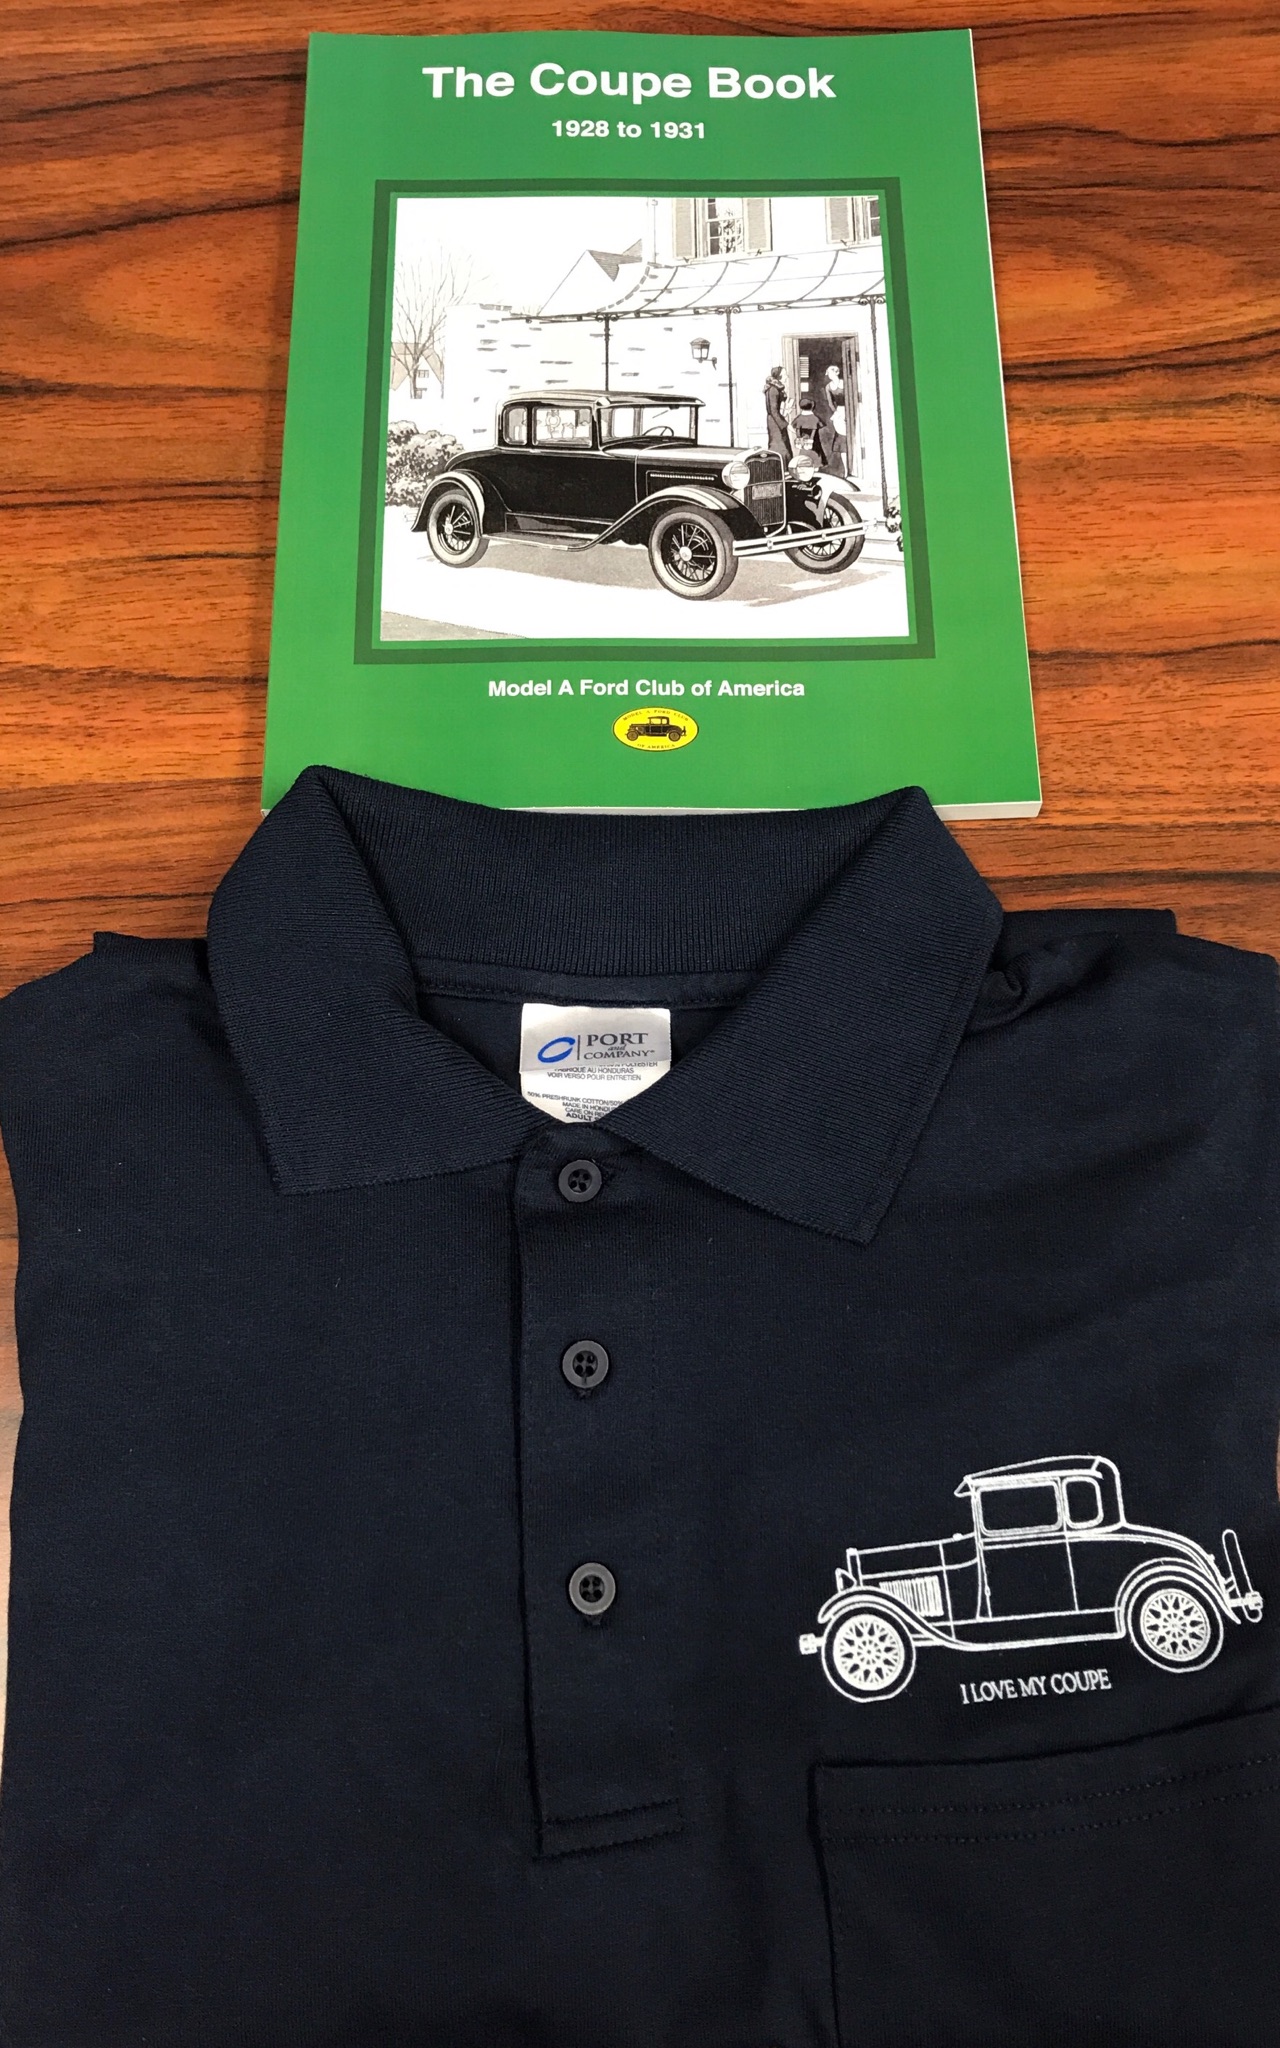 The Coupe Package - Includes Coupe Book & Coupe Polo Shirt 